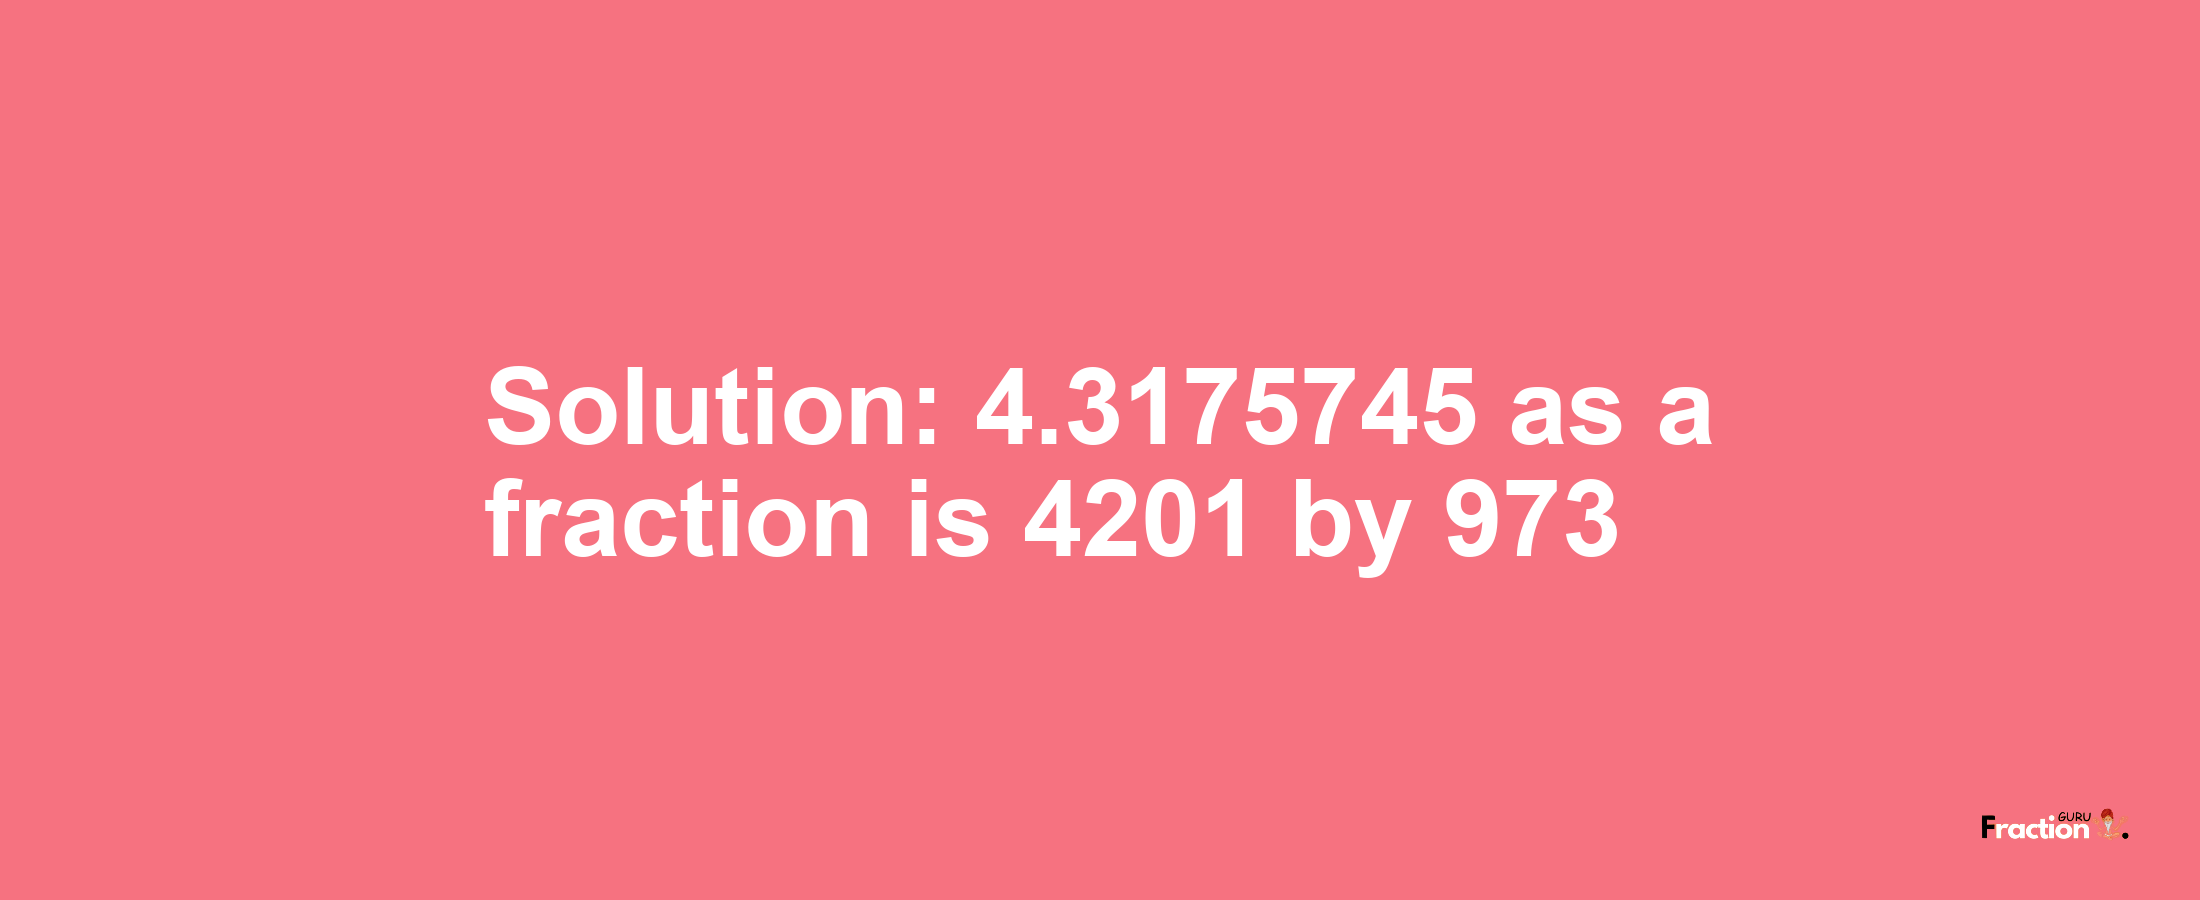 Solution:4.3175745 as a fraction is 4201/973